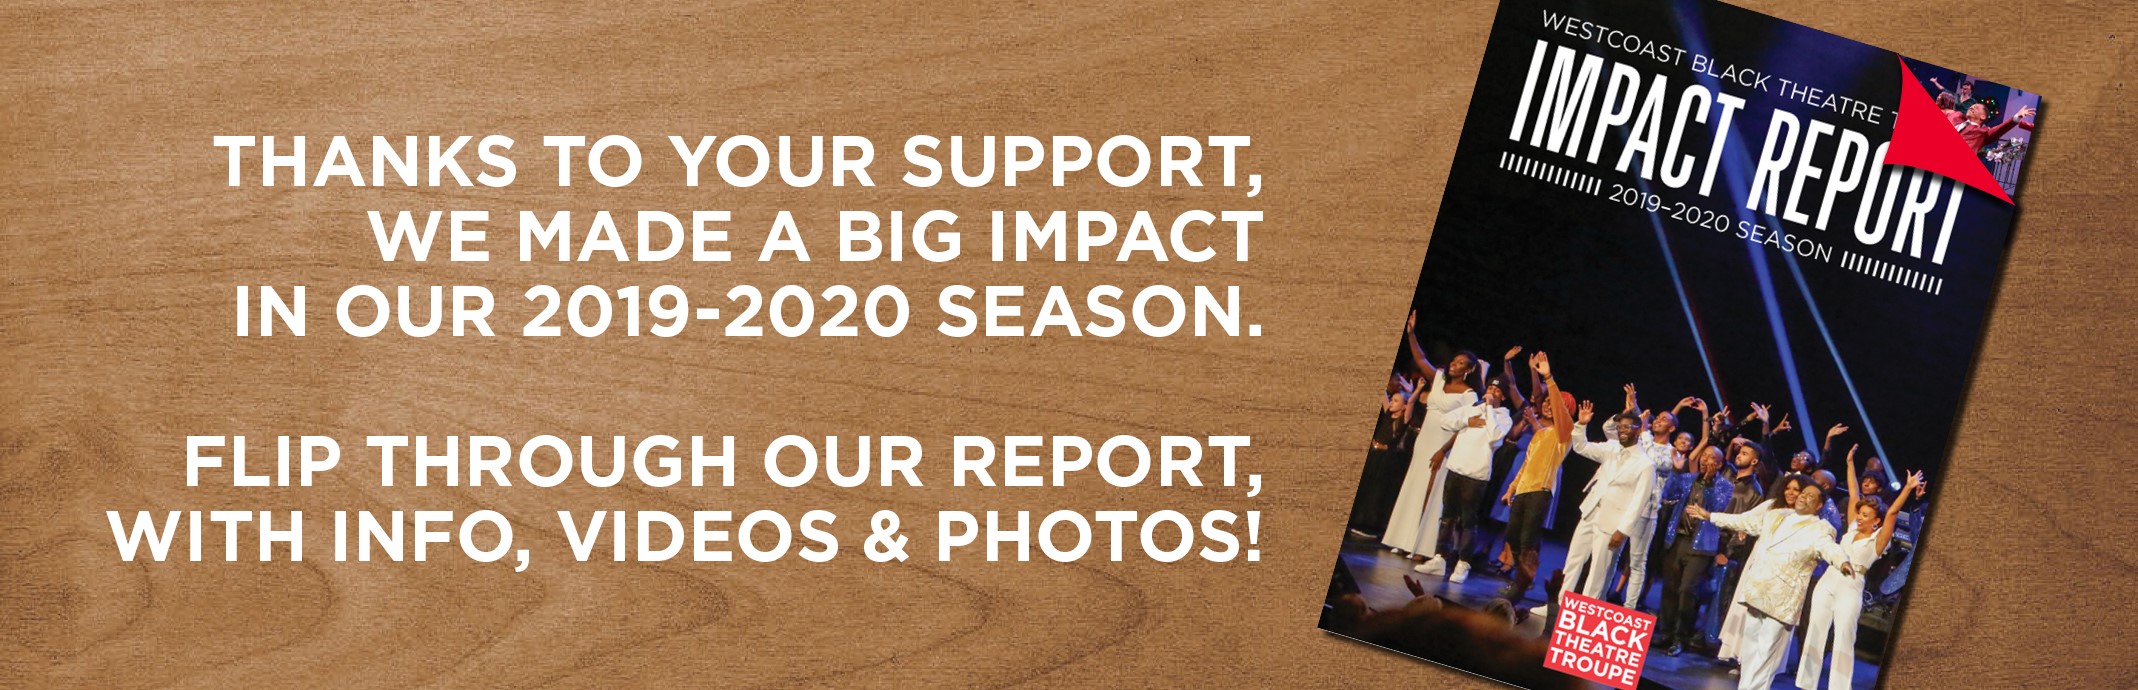 Thanks to your support, we made a big impact in our 2019-2020 season. Flip through our report, with info videos and photos!